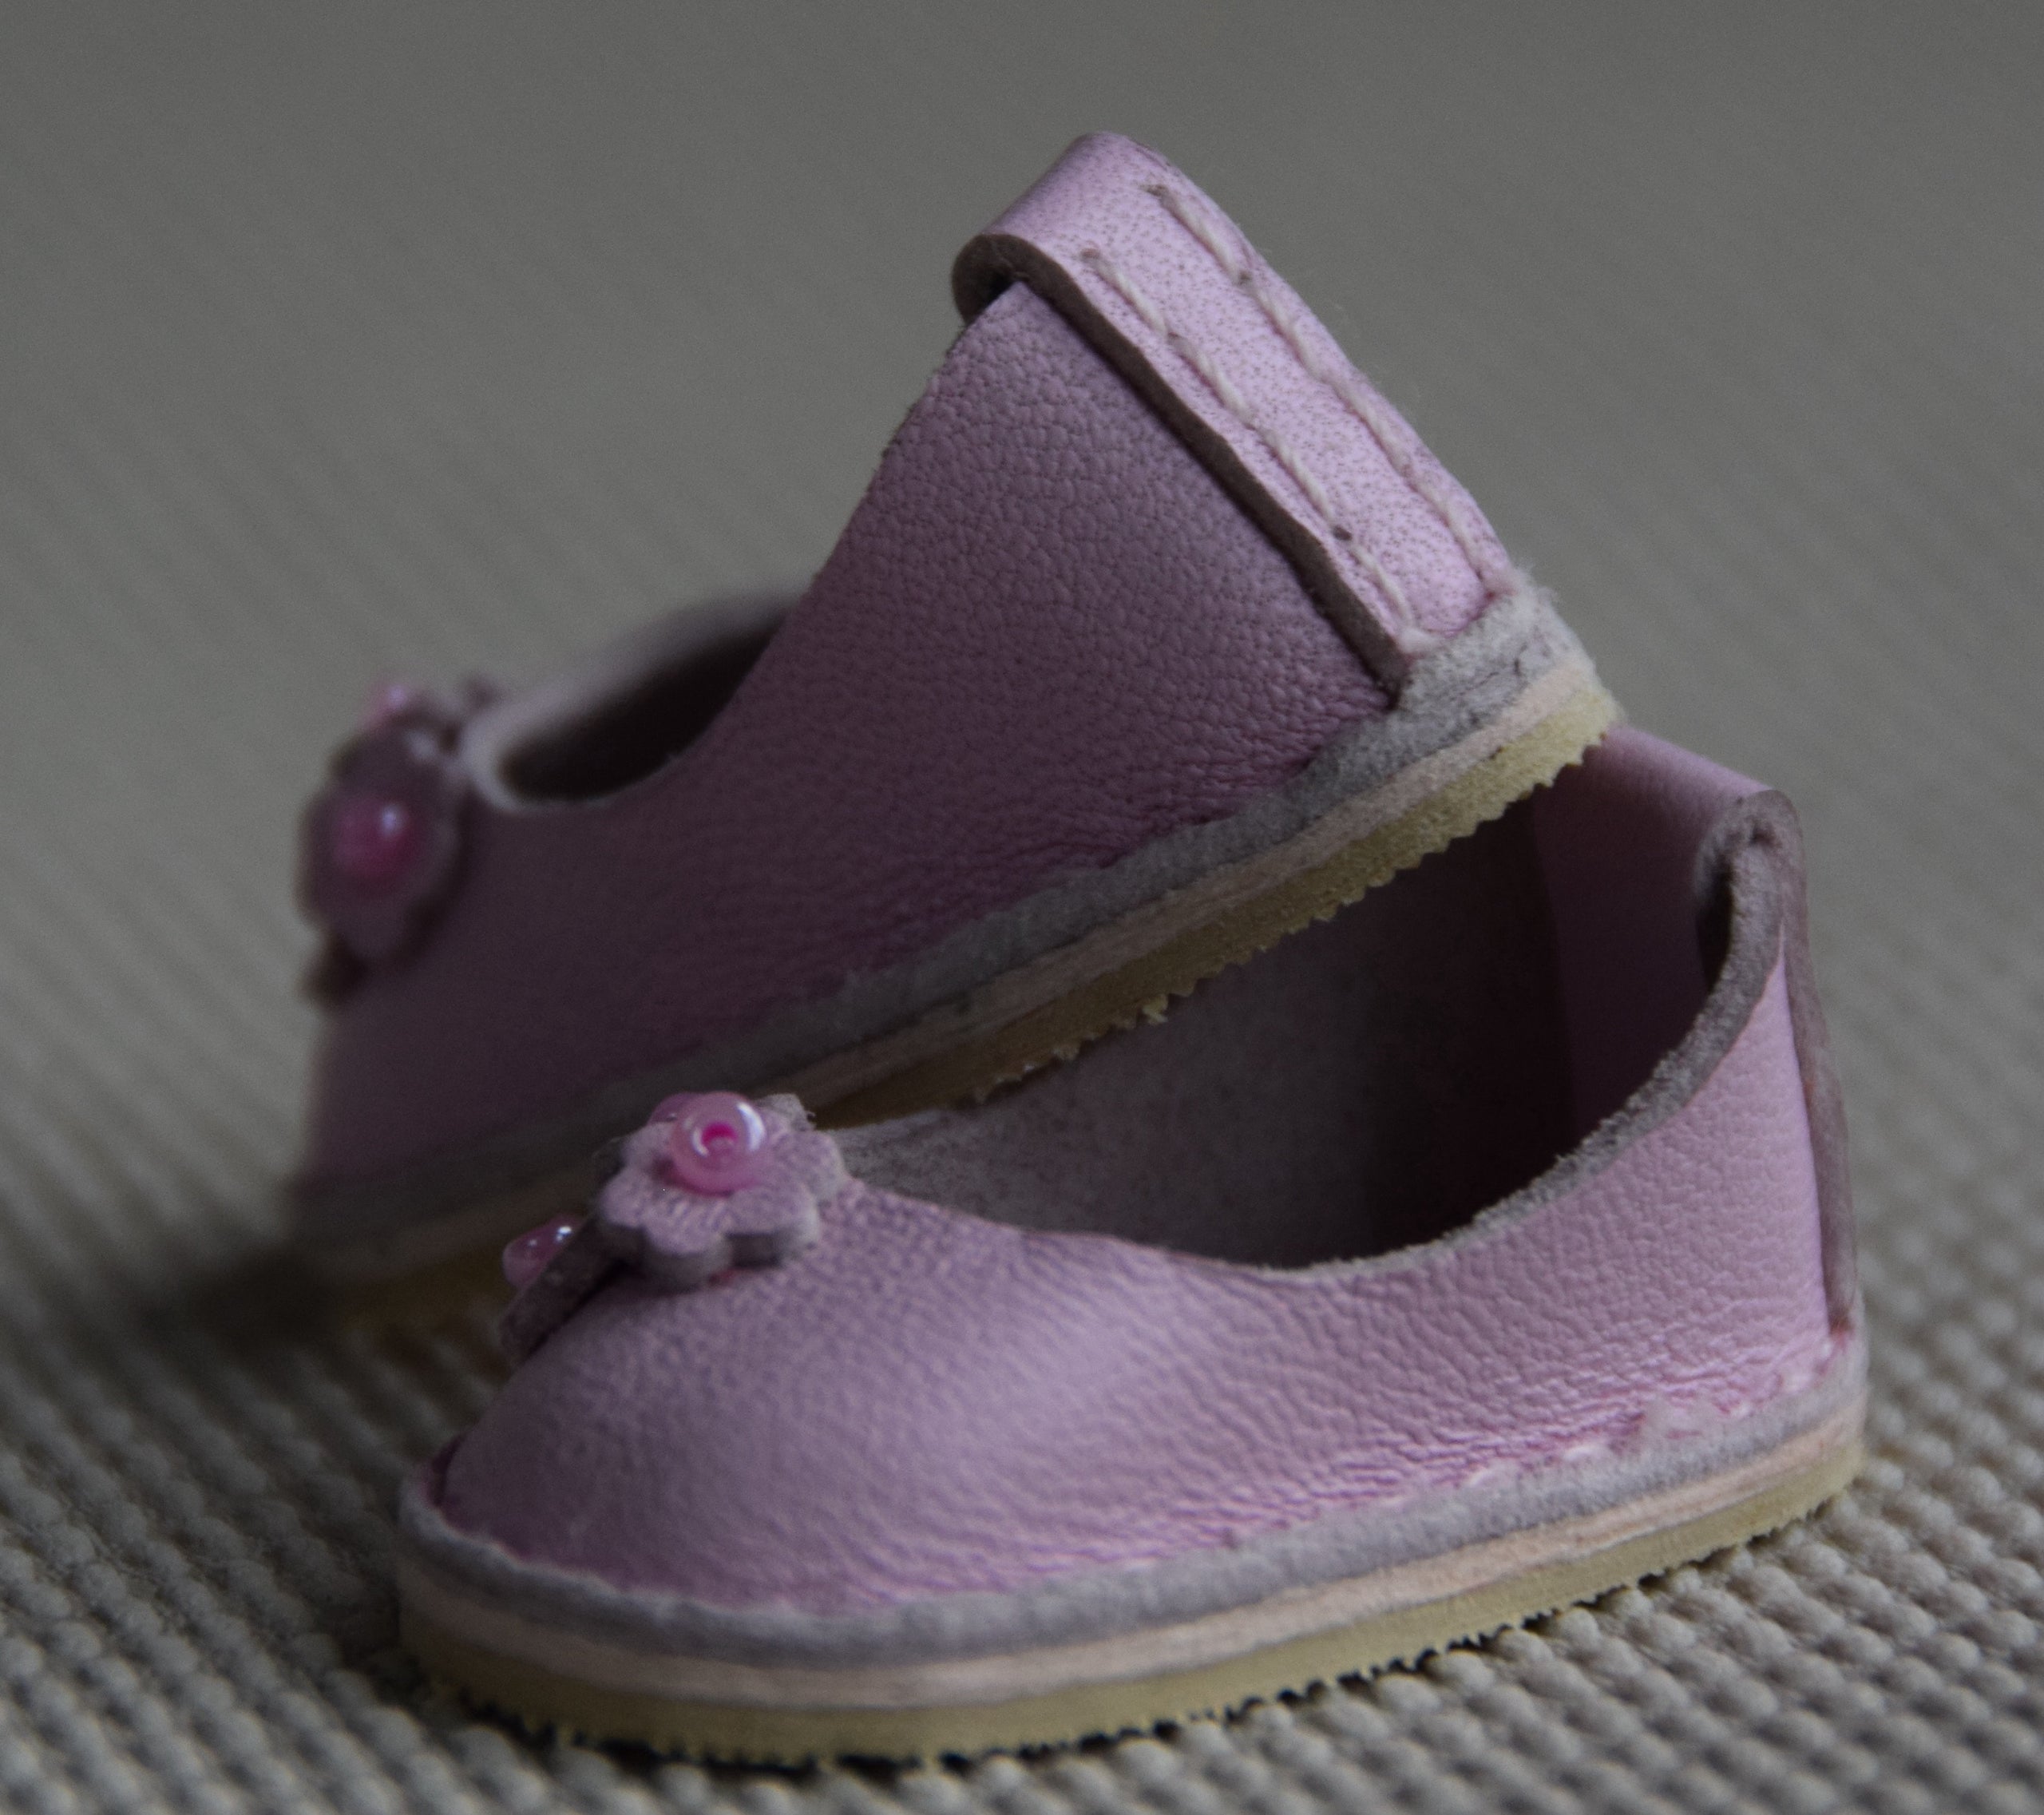 Handmade shoes for Little Darling dolls by Diana Effner - 071220-7118-35